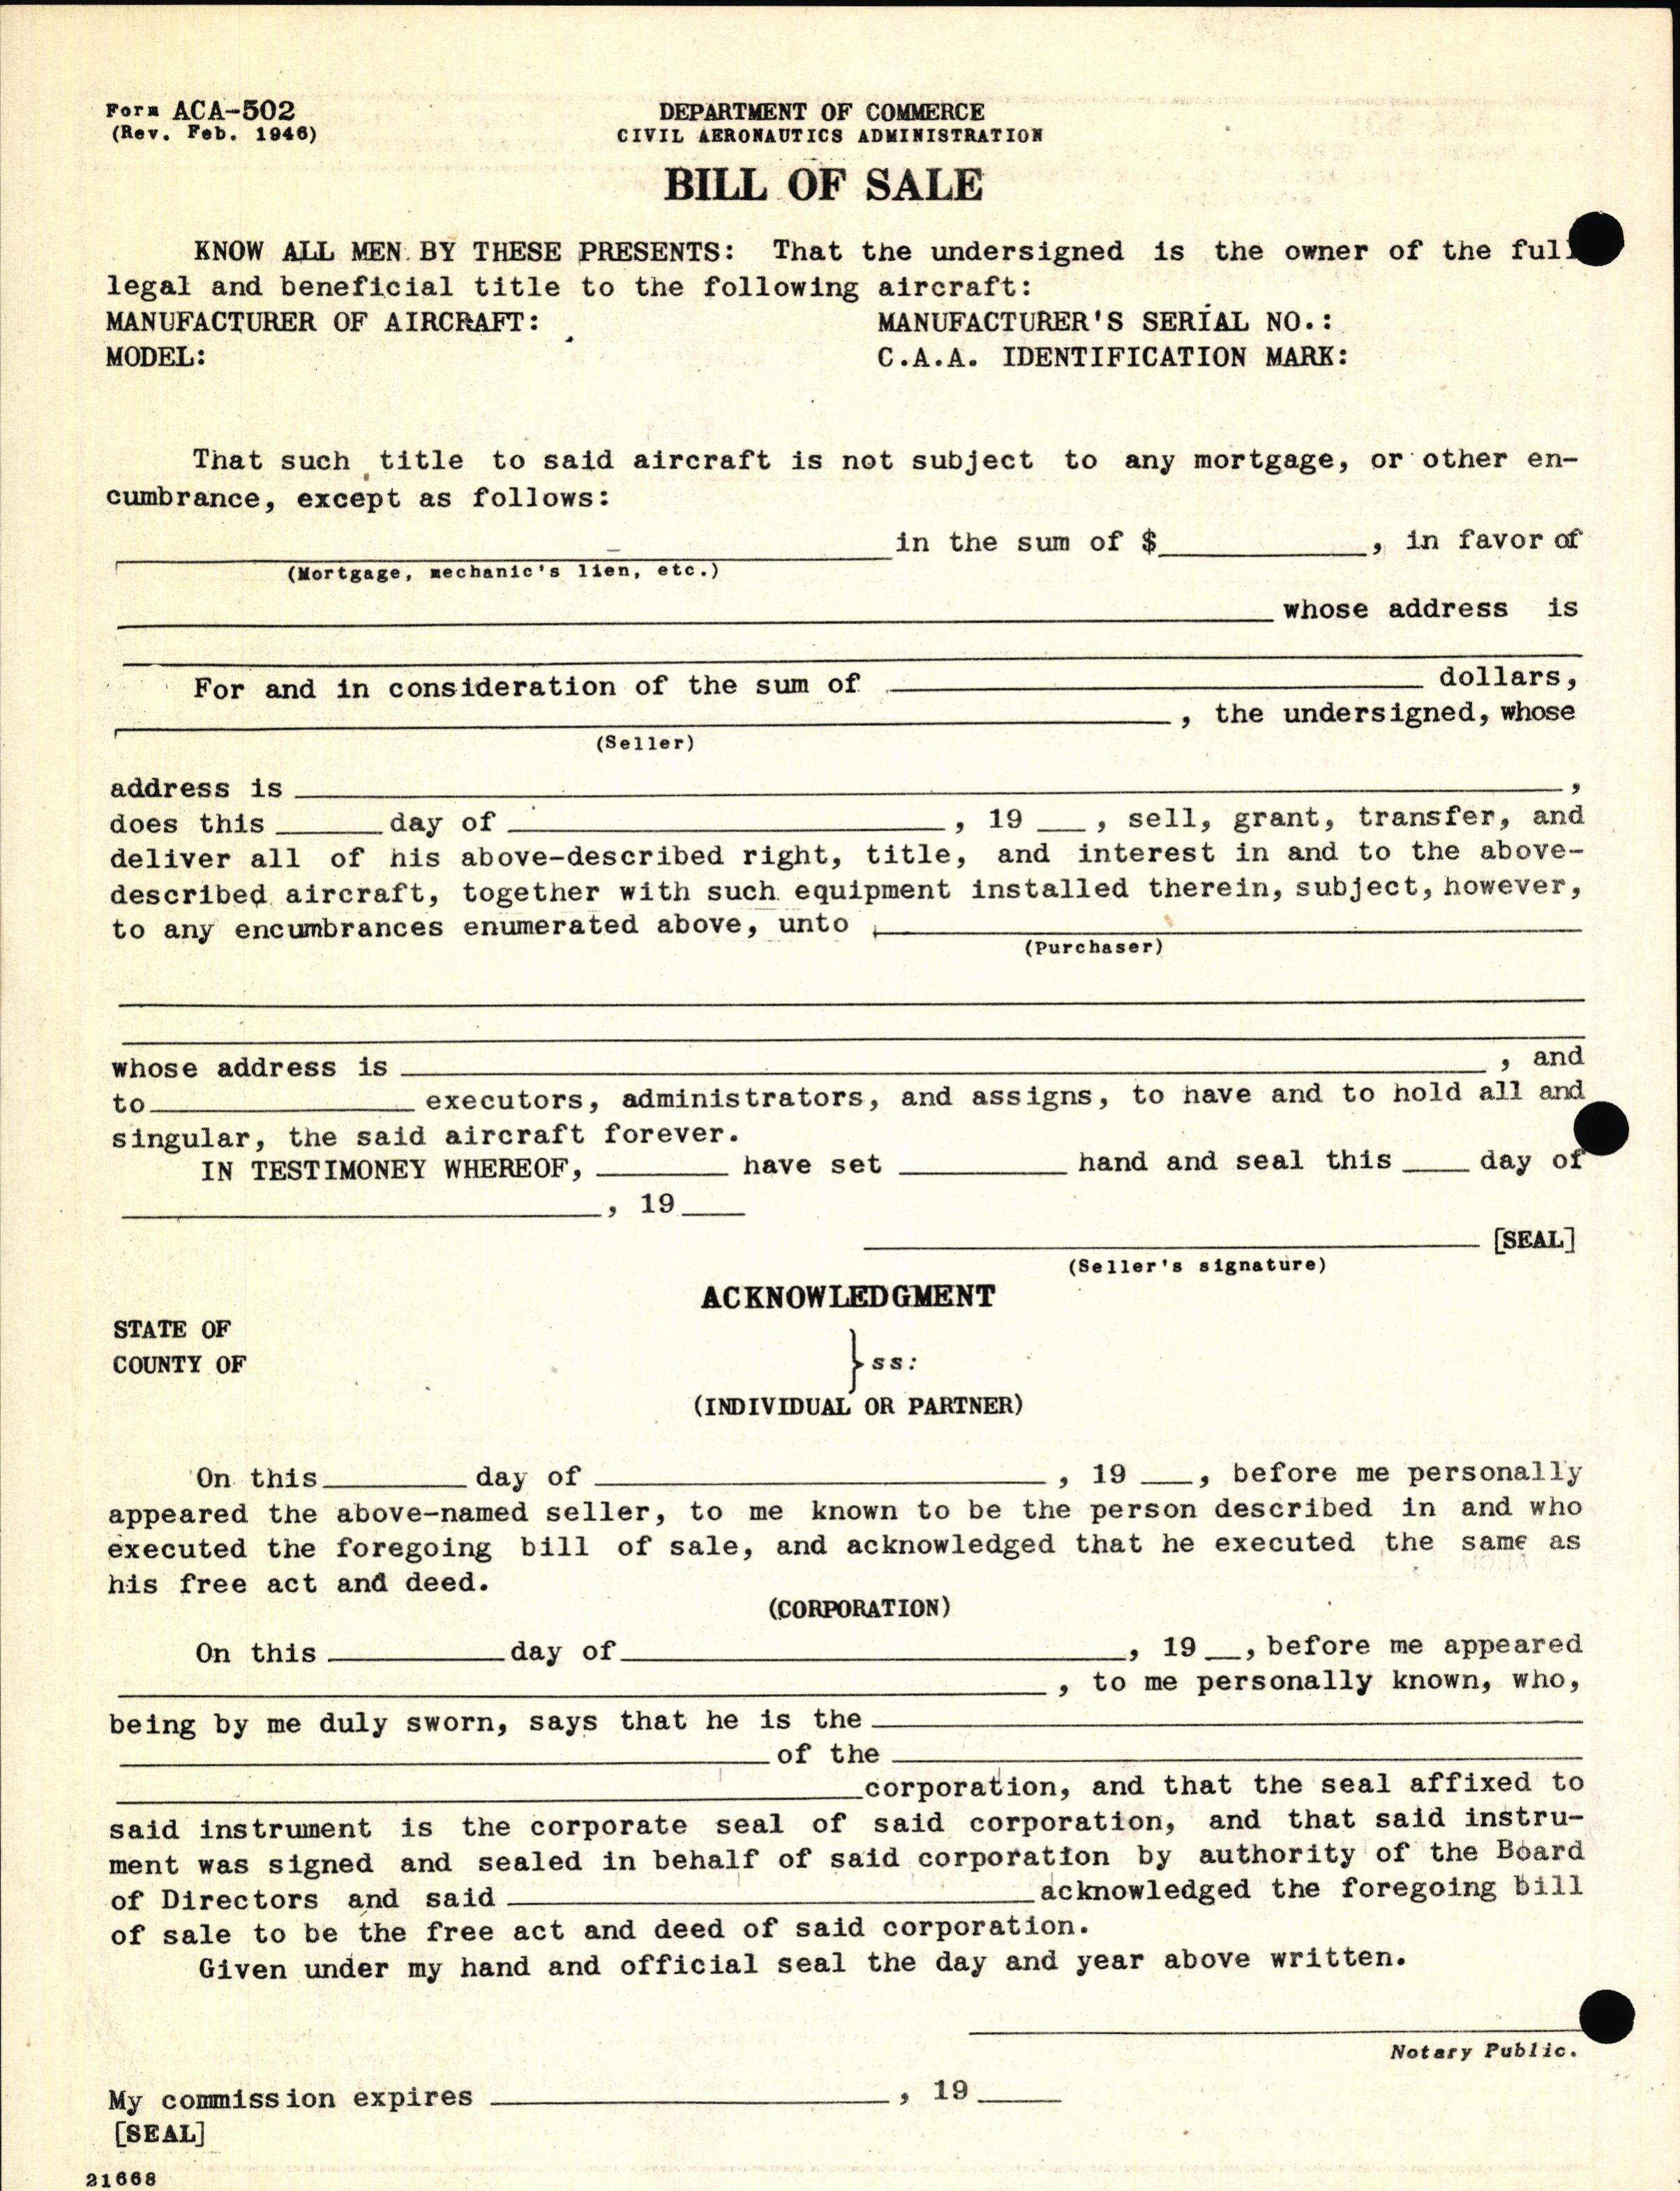 Sample page 6 from AirCorps Library document: Technical Information for Serial Number 2025